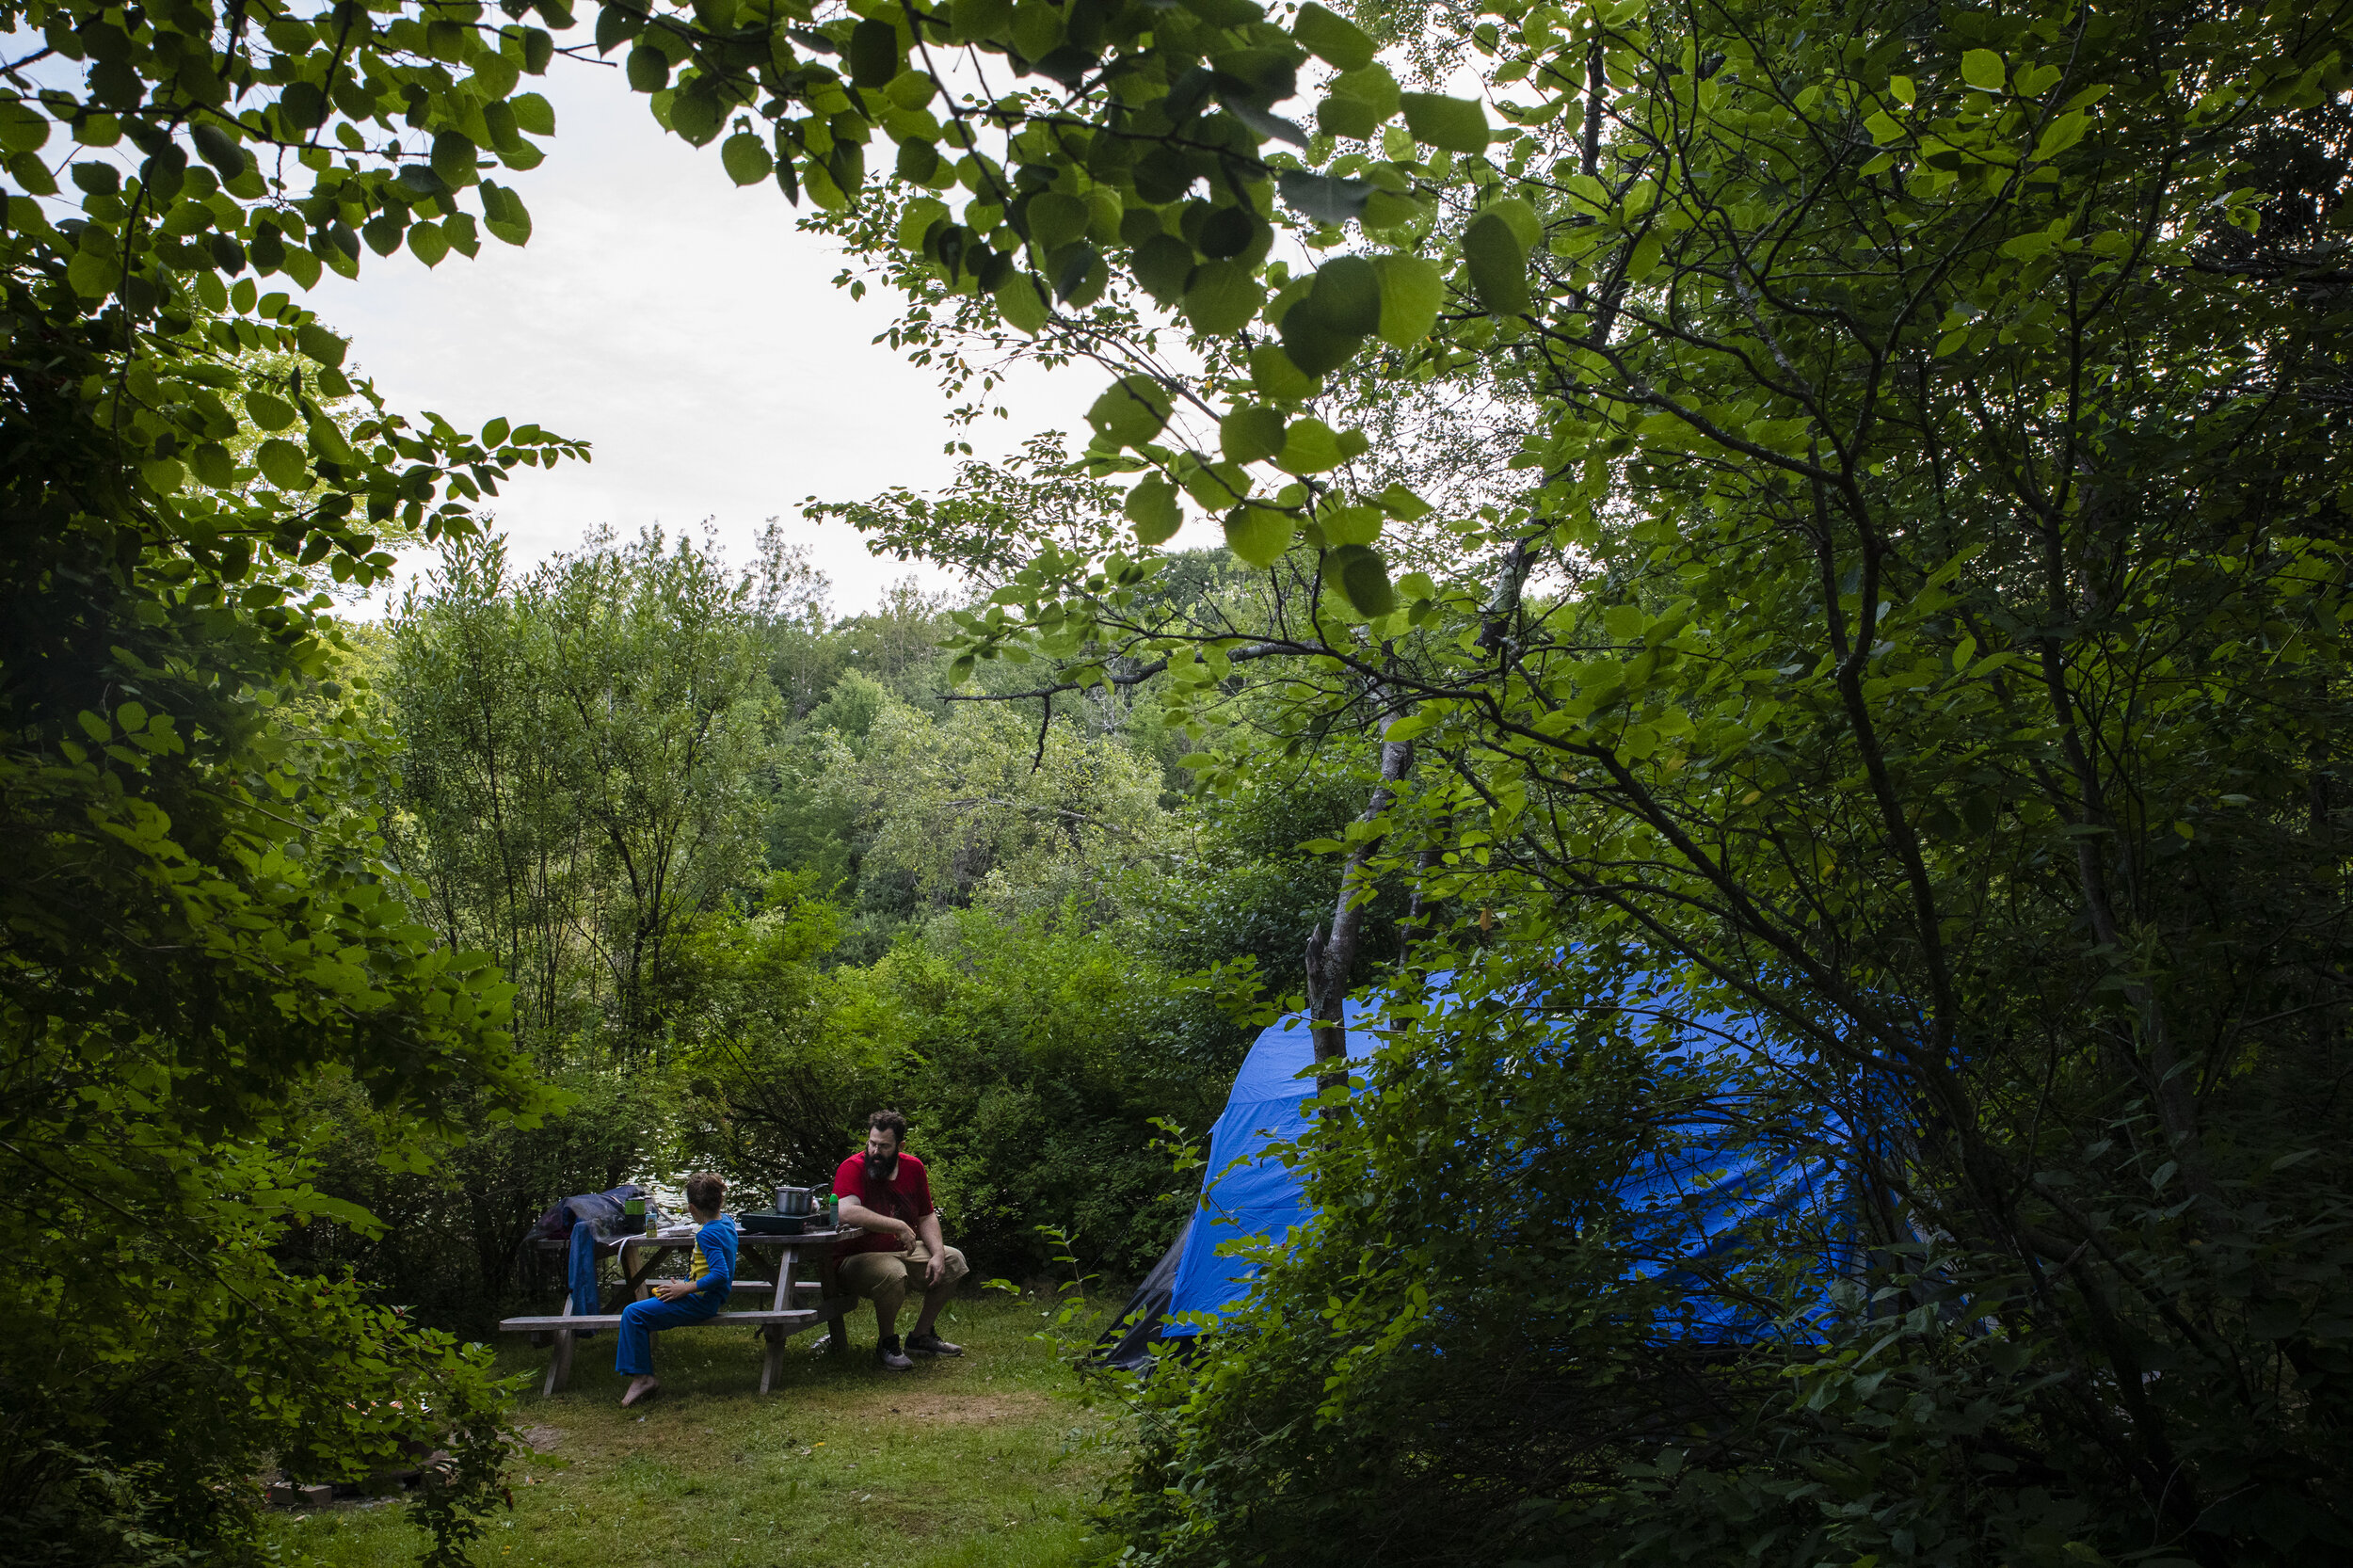 Patrick Lupien sits with his son Evan at their campsite while siblings Laya and Dylan watch movies in the van.  With the children's special needs, Mariah and Patrick have found it difficult to keep an